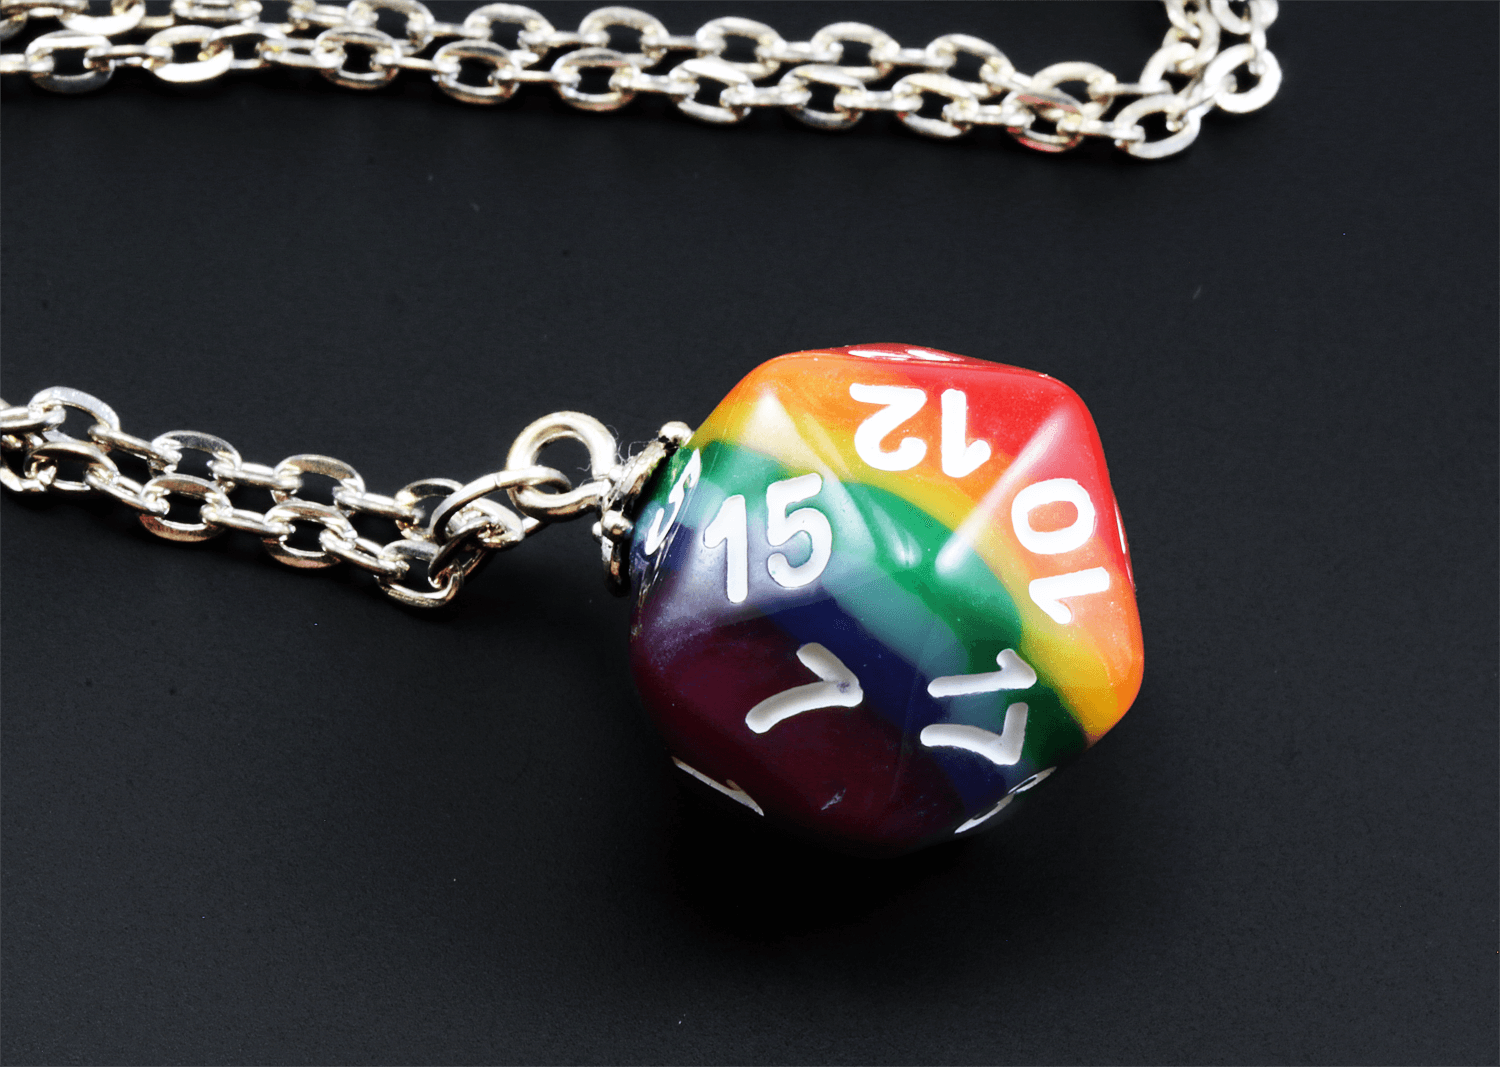 D20 Dice Necklace - EirynaElf's Ko-fi Shop - Ko-fi ❤️ Where creators get  support from fans through donations, memberships, shop sales and more! The  original 'Buy Me a Coffee' Page.